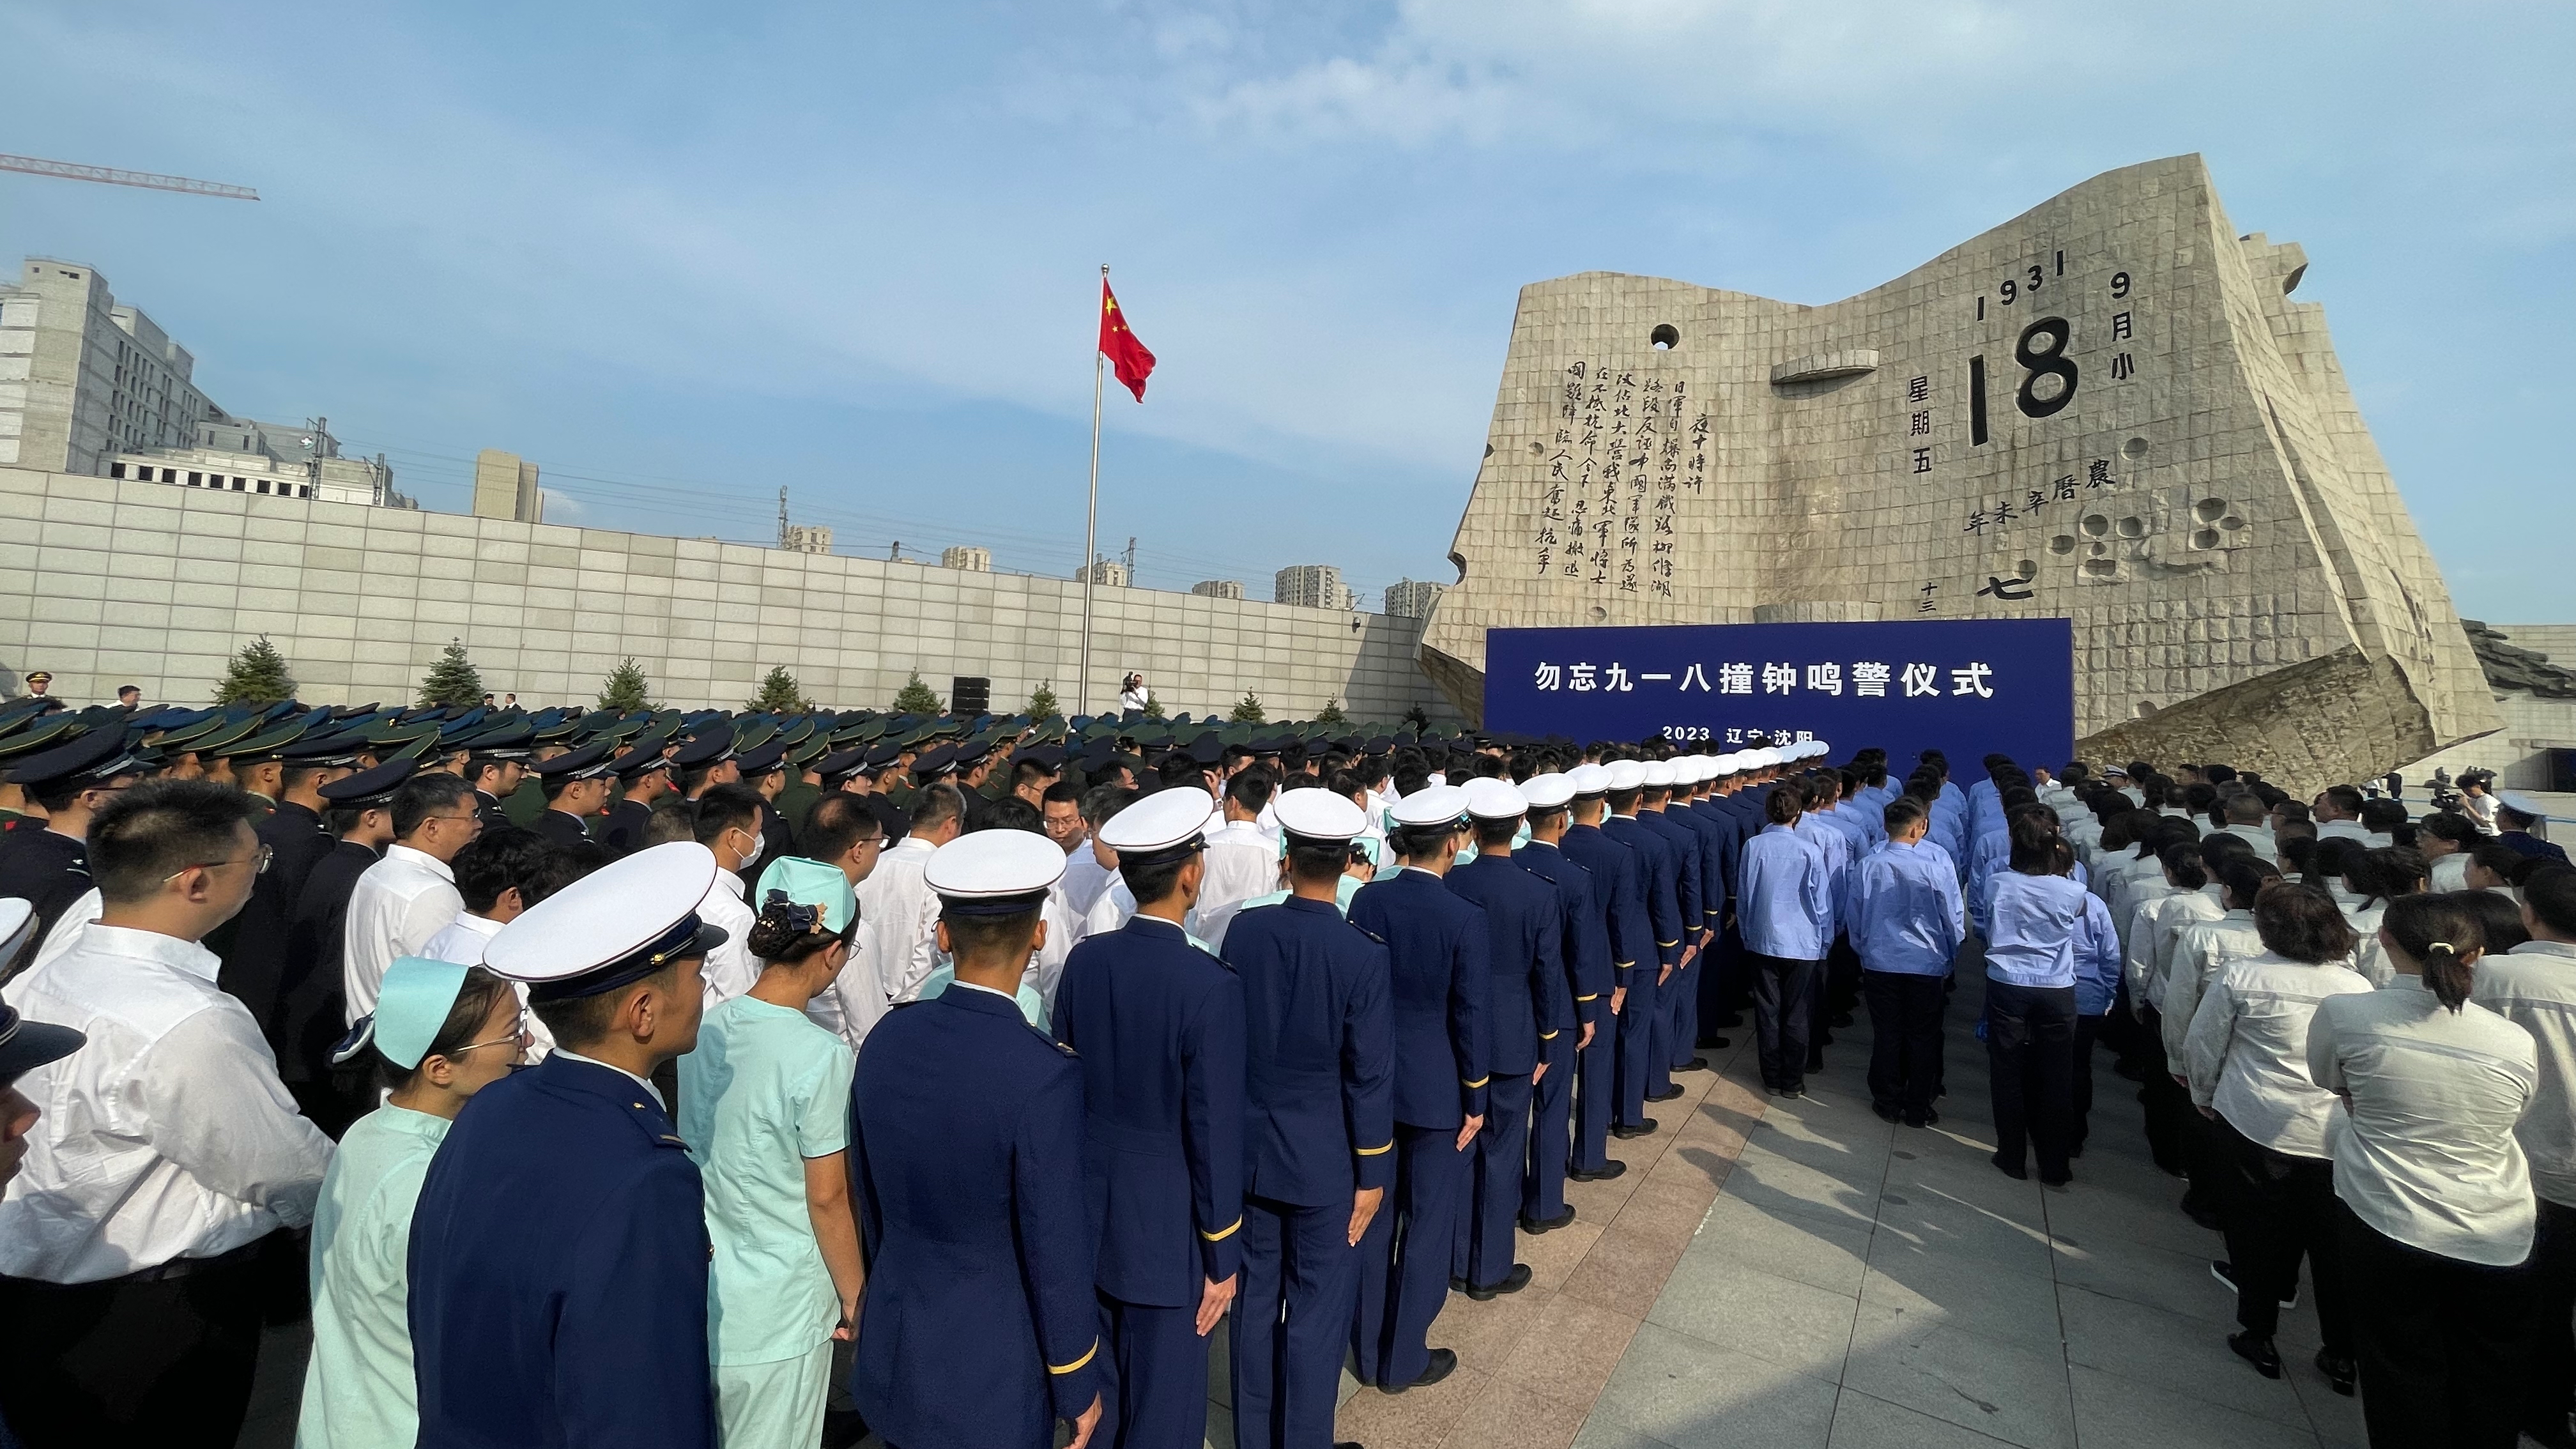 A commemoration ceremony for the 92nd anniversary of the September 18 Incident is held in Shenyang, northeast China's Liaoning Province, September 18, 2023. /CGTN